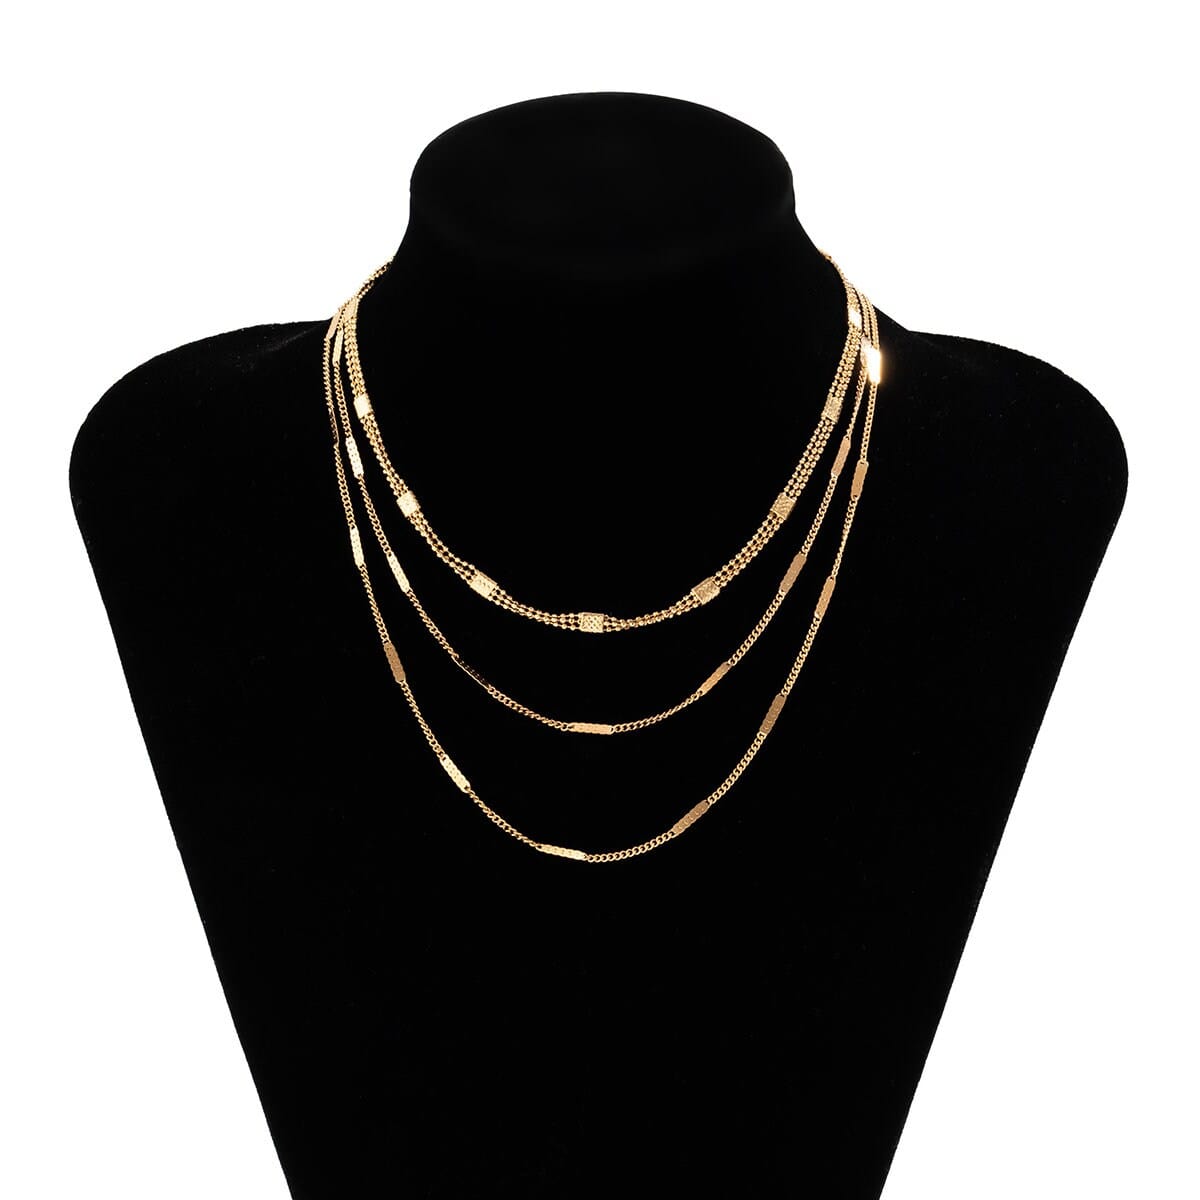 Chic Layered Gold Silver Tone – Set ArtGalleryZen Chain Curb Necklace Link Ball